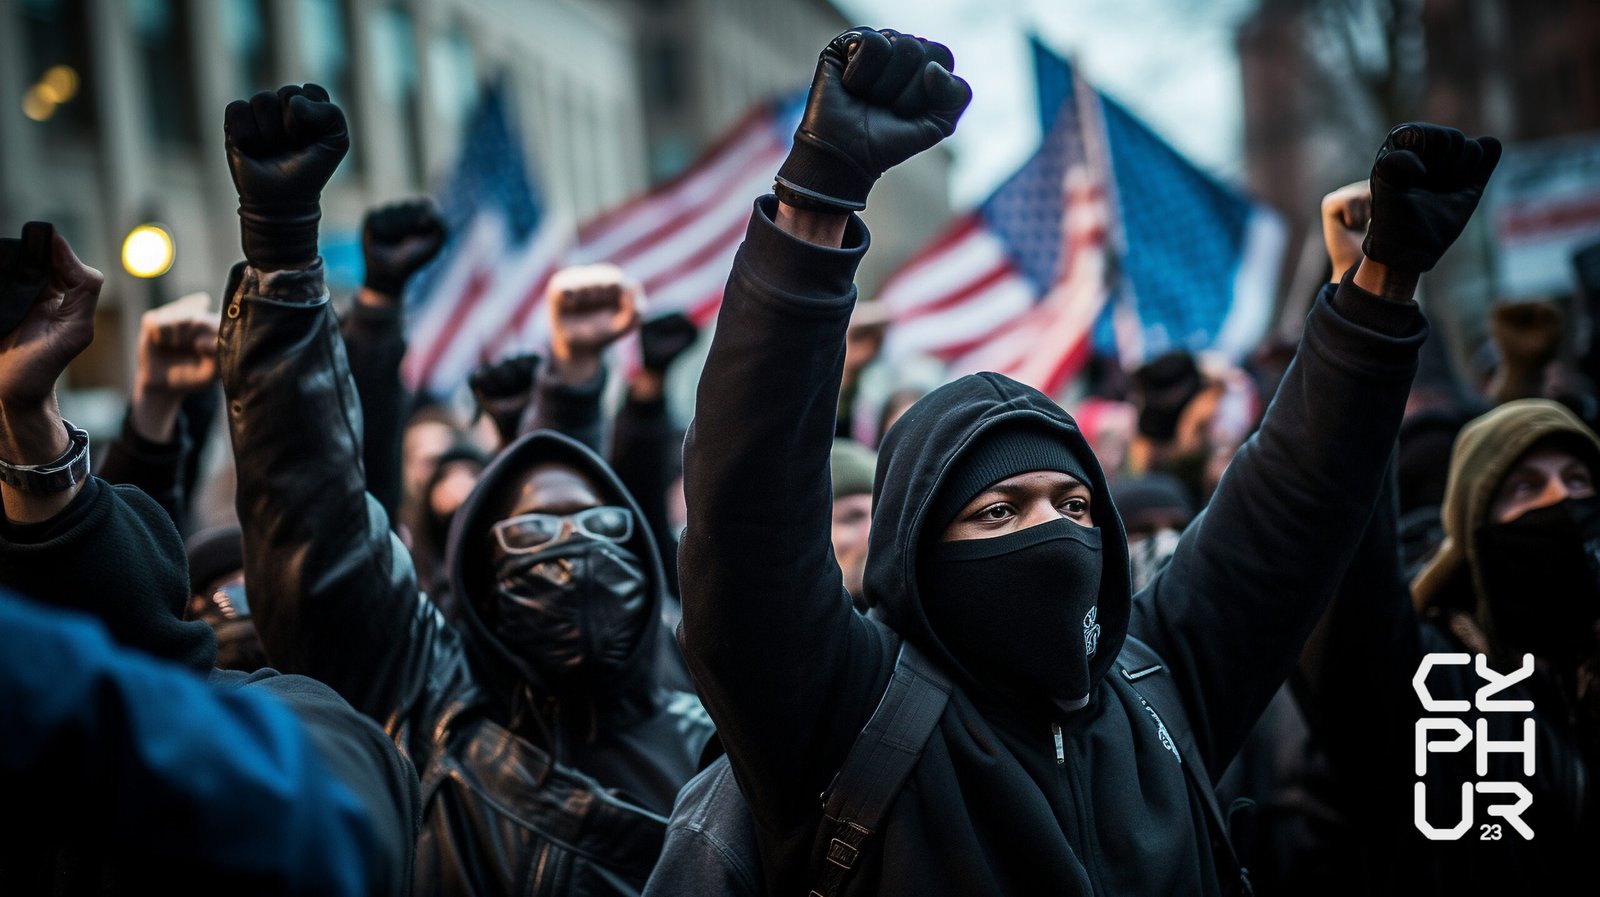 A Hypothetical Tale: The January 6 Insurrection and the Perils of Racial Double Standards